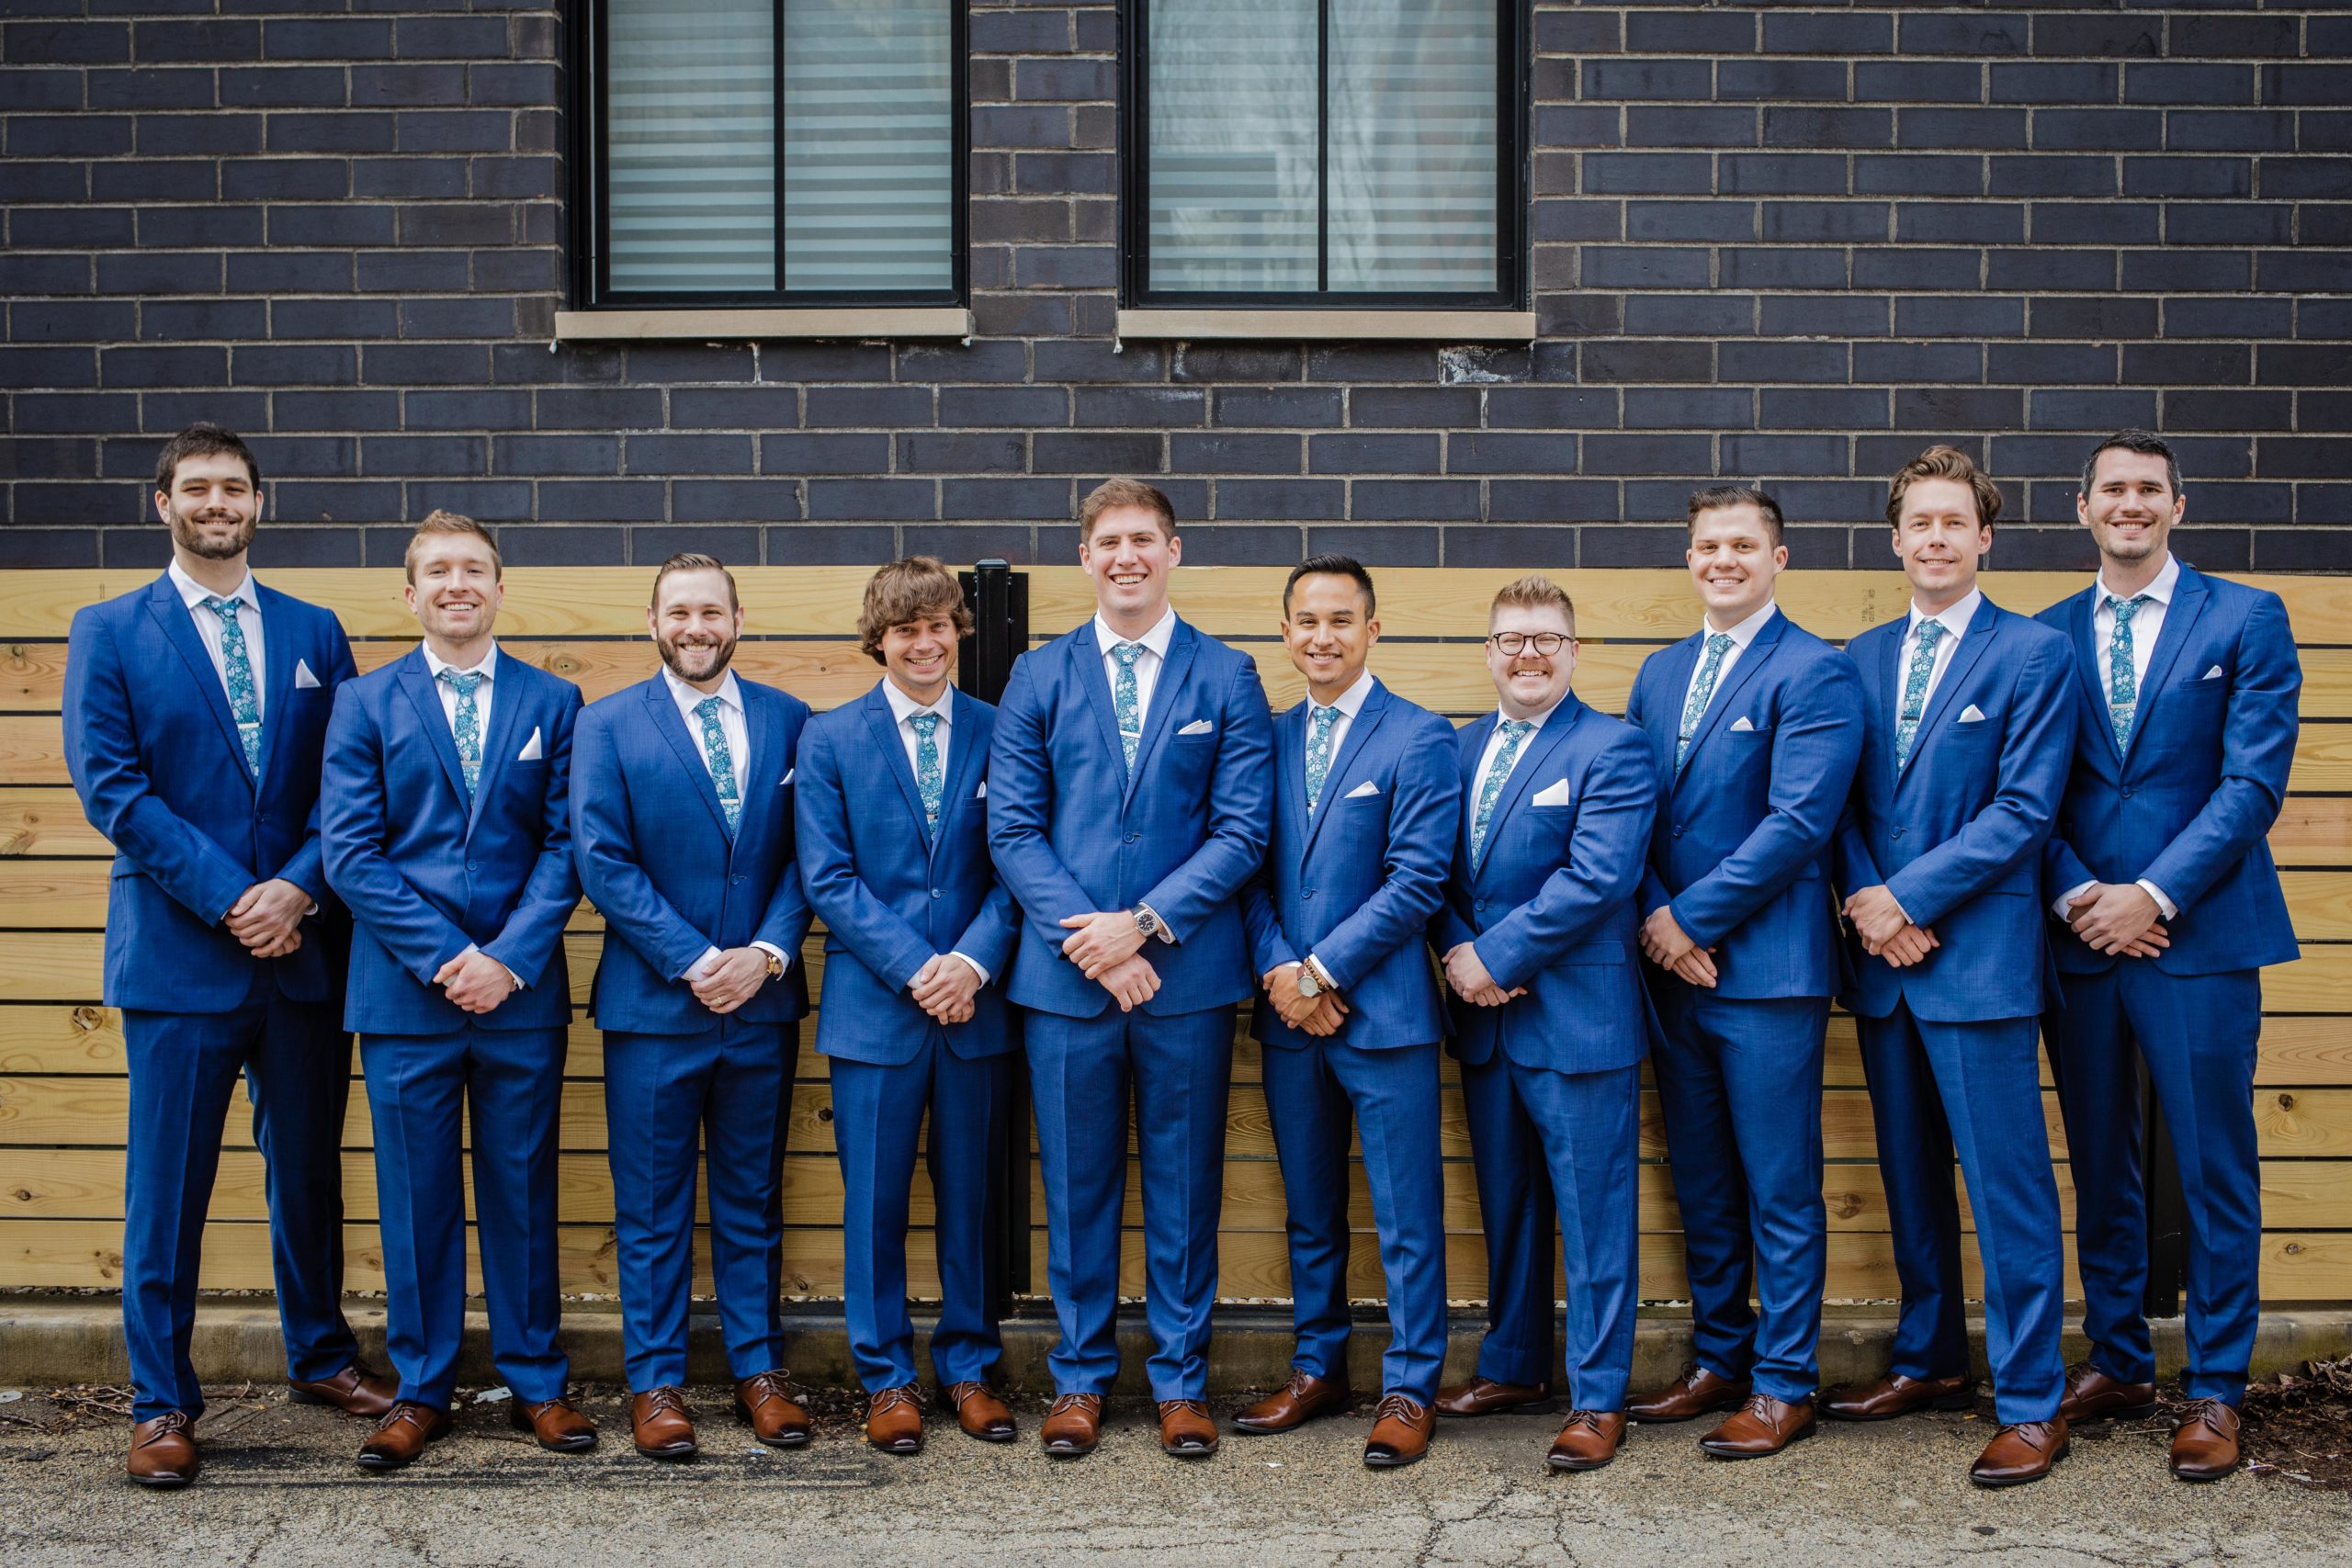 Groom posing for a photo with his groomsmen before his wedding at The Joinery in Chicago